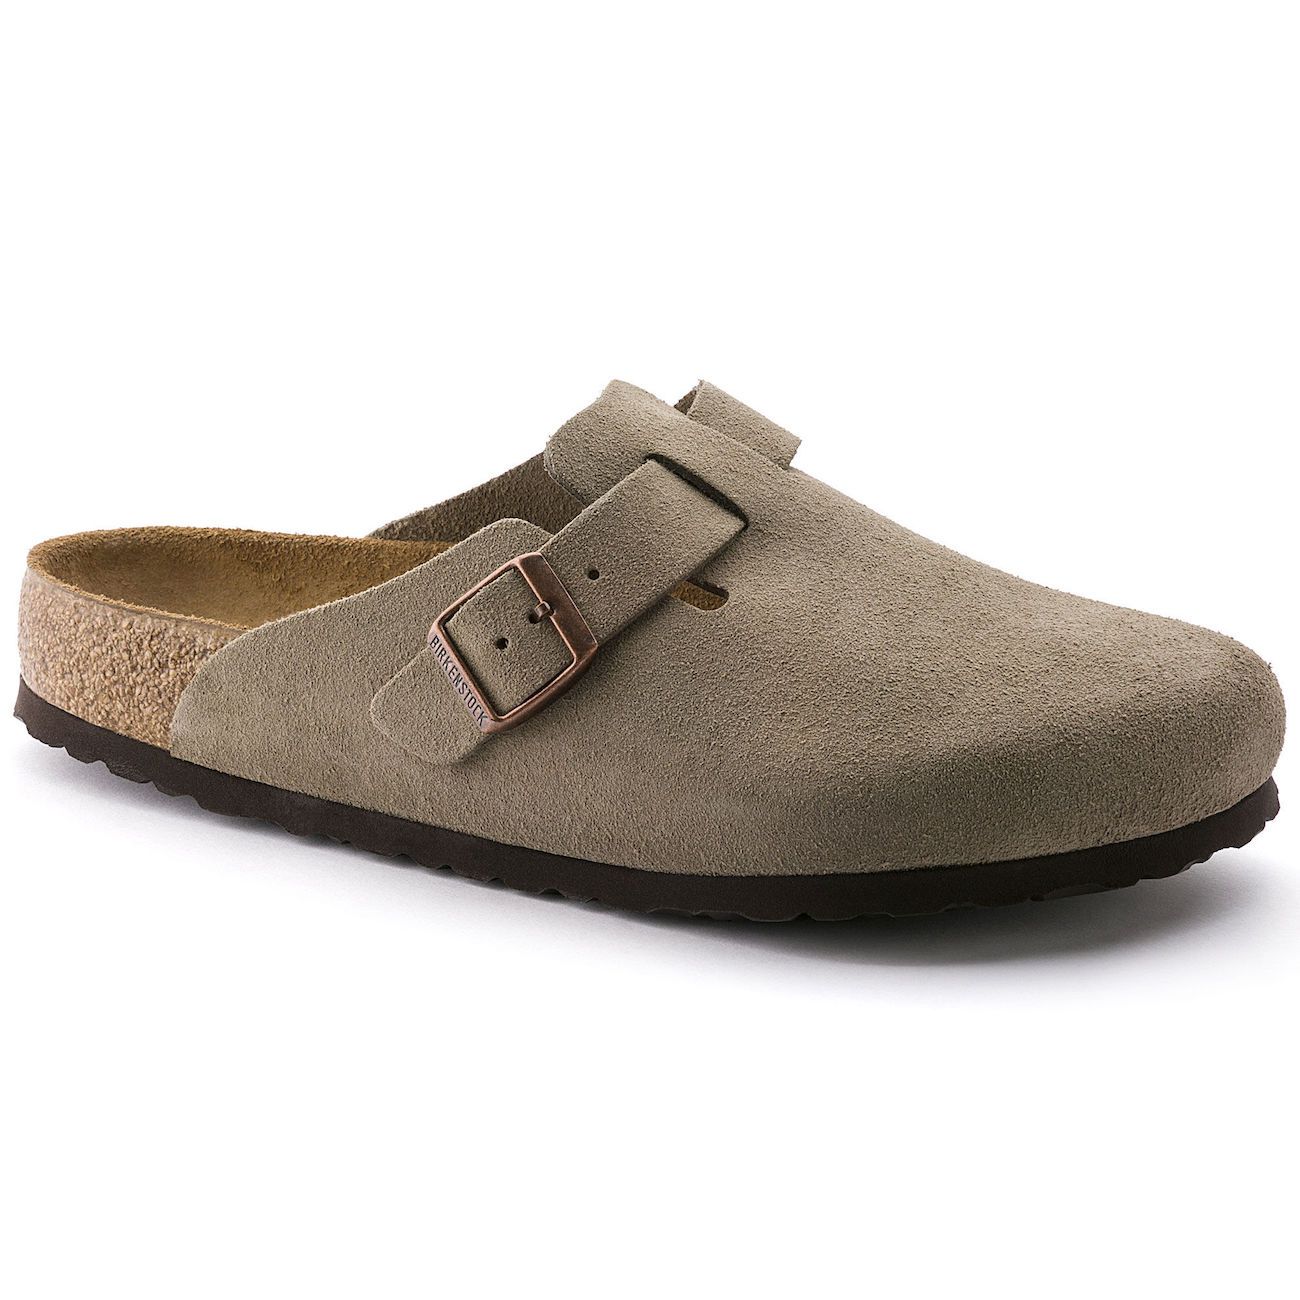 Birkenstock Classic, Boston, Narrow Fit, Suede Leather, Taupe Clogs Birkenstock Classic Taupe 38 